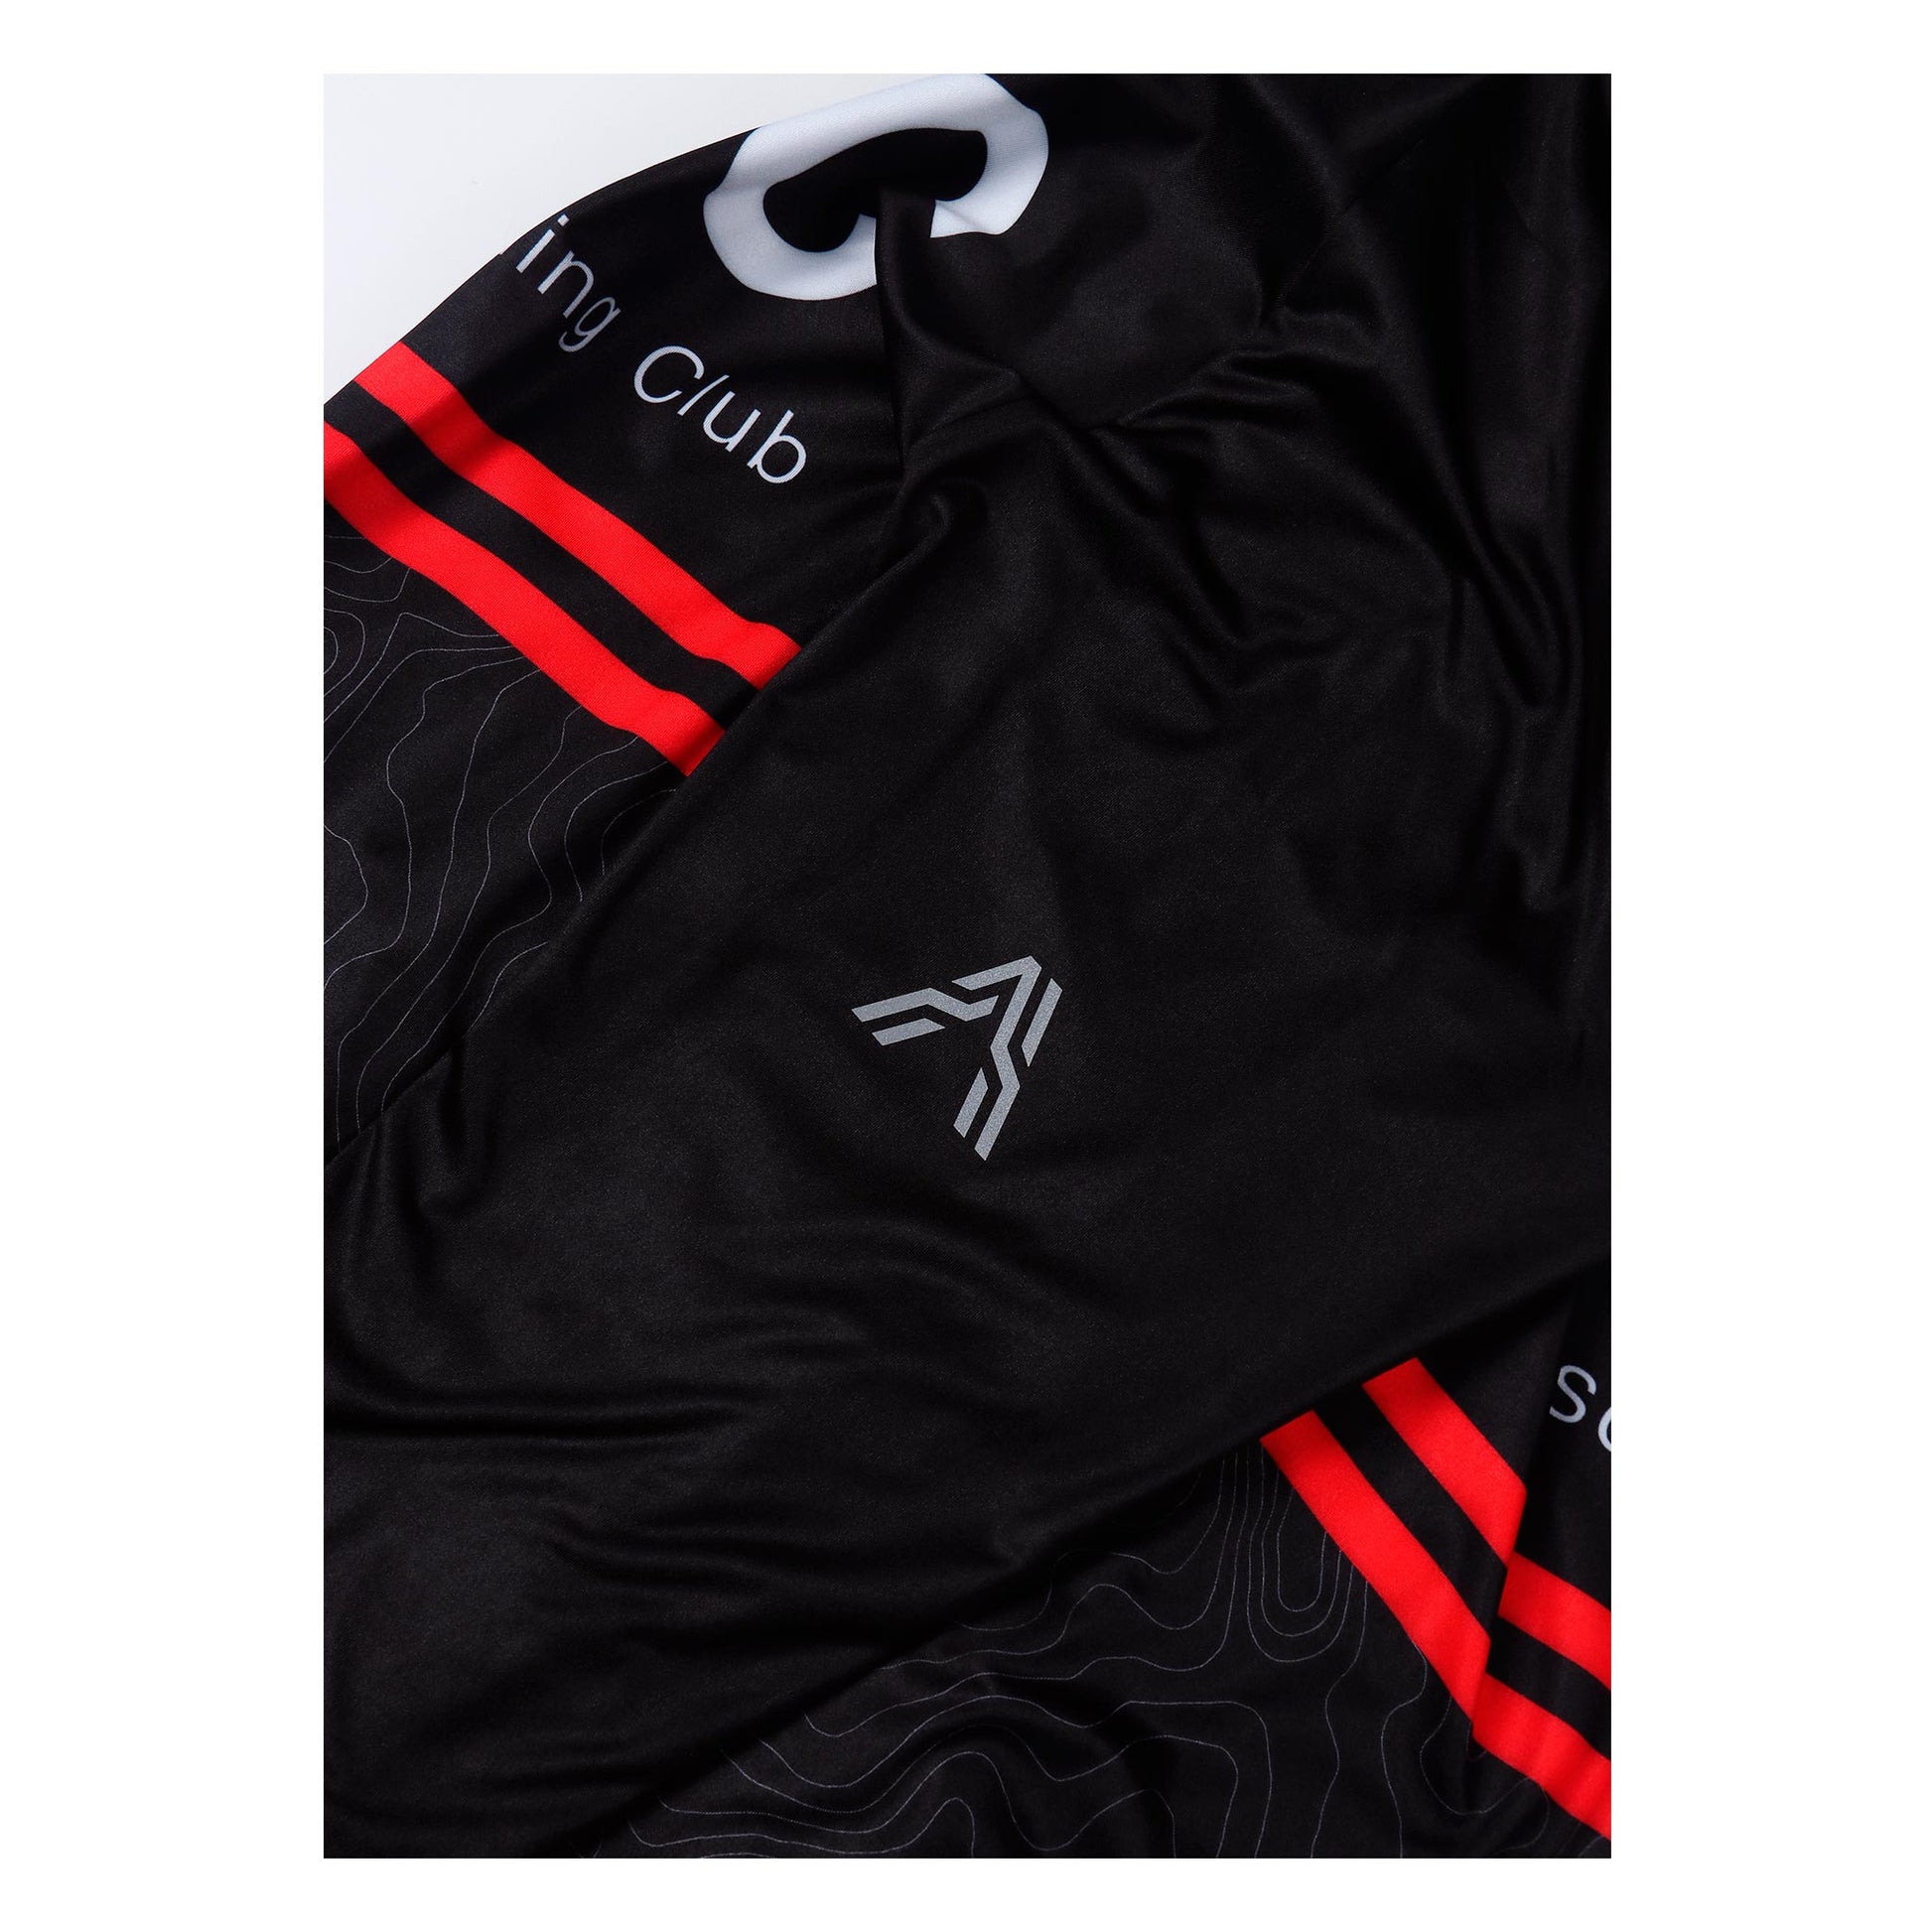 ACC Stellar long sleeve jersey black with sustainable fabrics from Ascender Cycling Club Zürich Switzerland Detailled View Sleeve Logo 3D